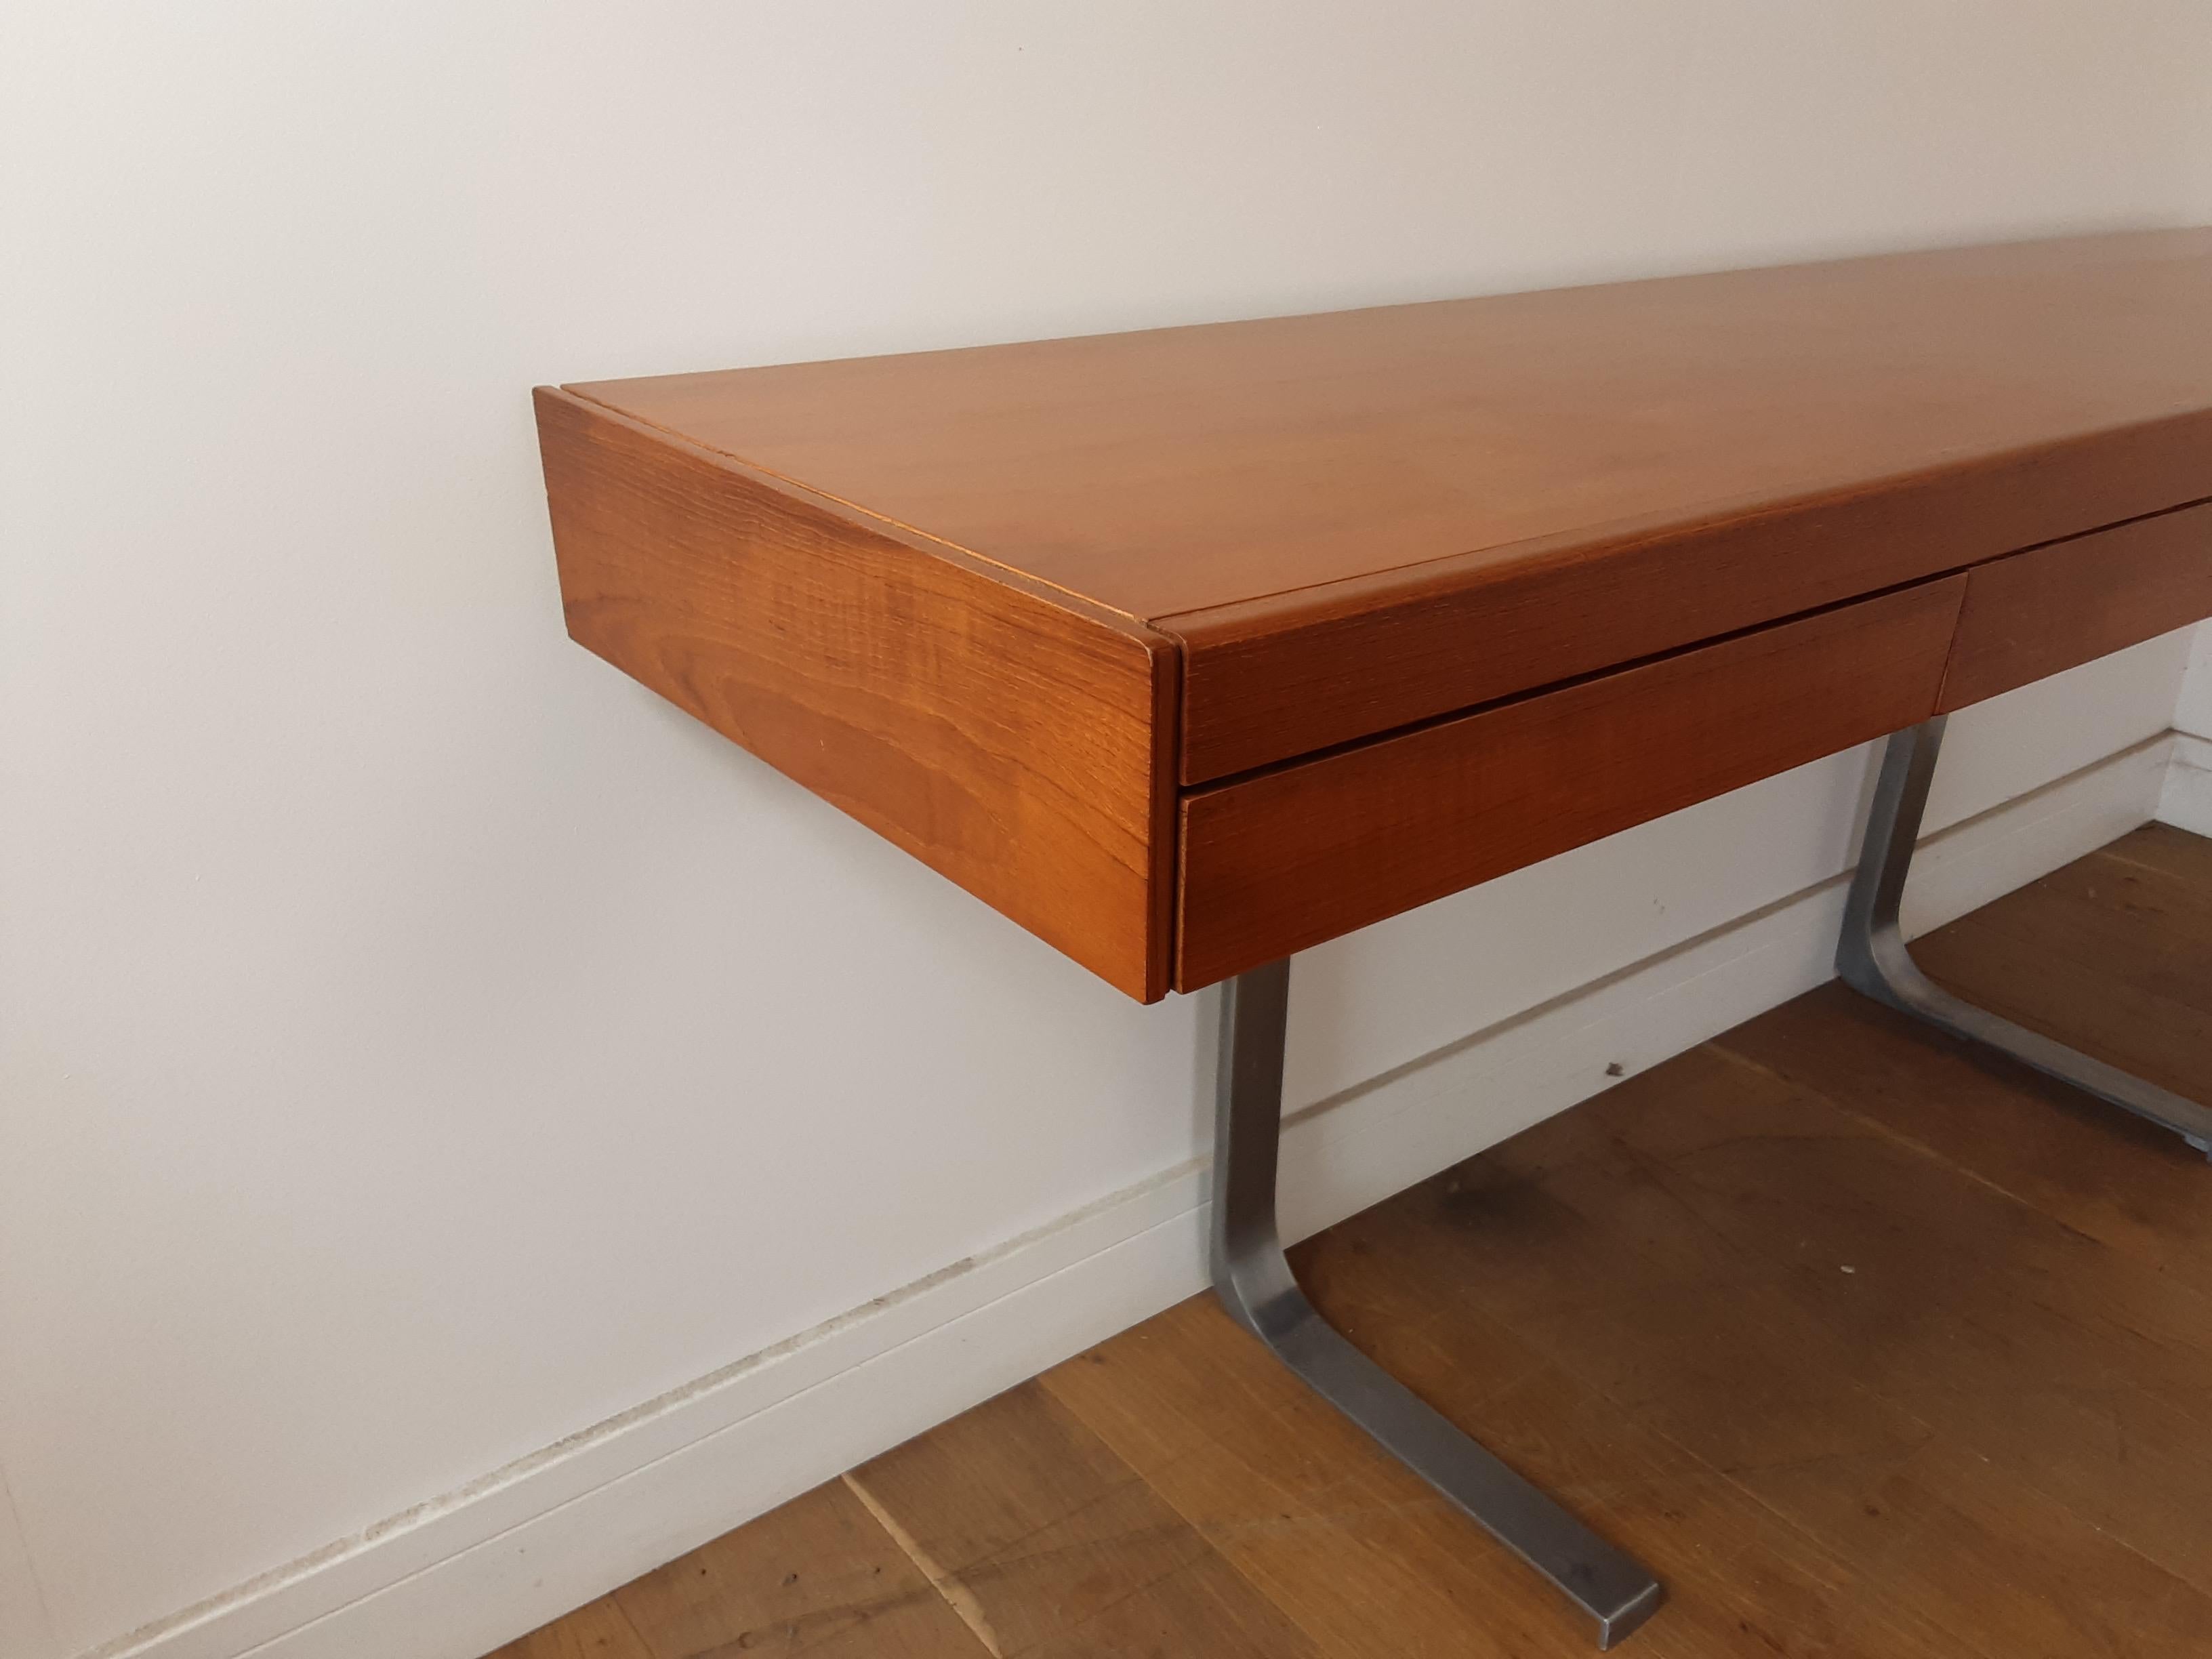 Midcentury floating desk or console
midcentury desk or console in a golden teak wood with two drawers and aluminium kangaroo legs. Designed by Robert Heritage for the planar collection for Archie Shine.
Measures: 76 cm H, 183 cm W, 46 cm